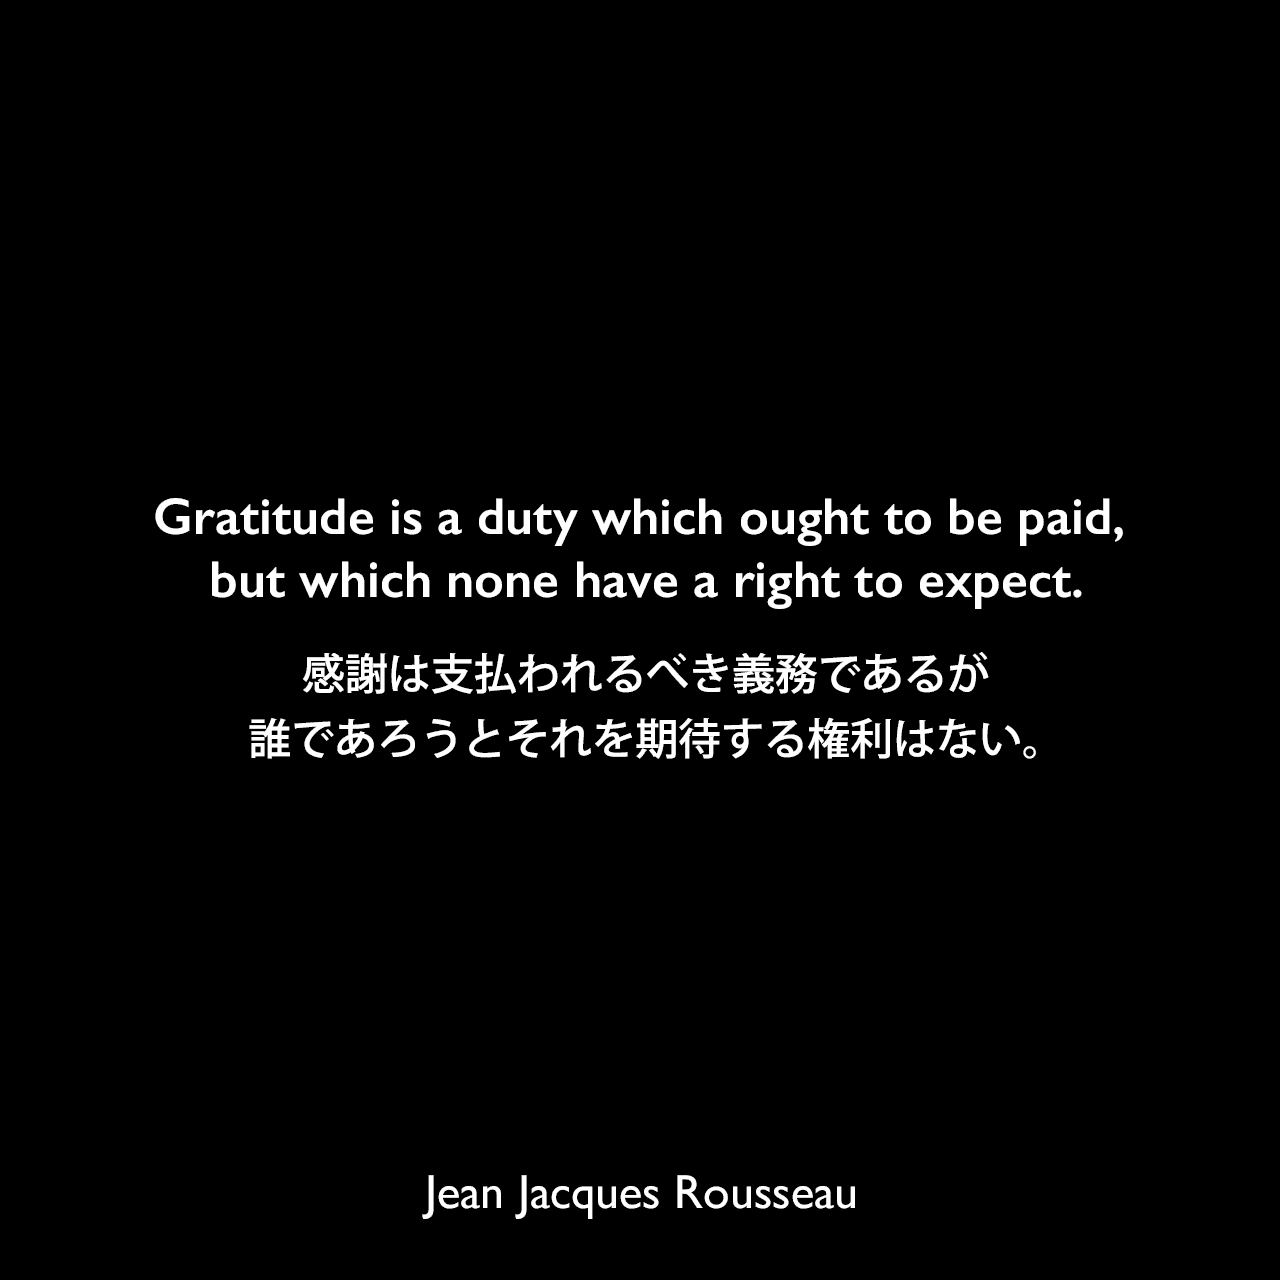 Gratitude is a duty which ought to be paid, but which none have a right to expect.感謝は支払われるべき義務であるが、誰であろうとそれを期待する権利はない。Jean Jacques Rousseau